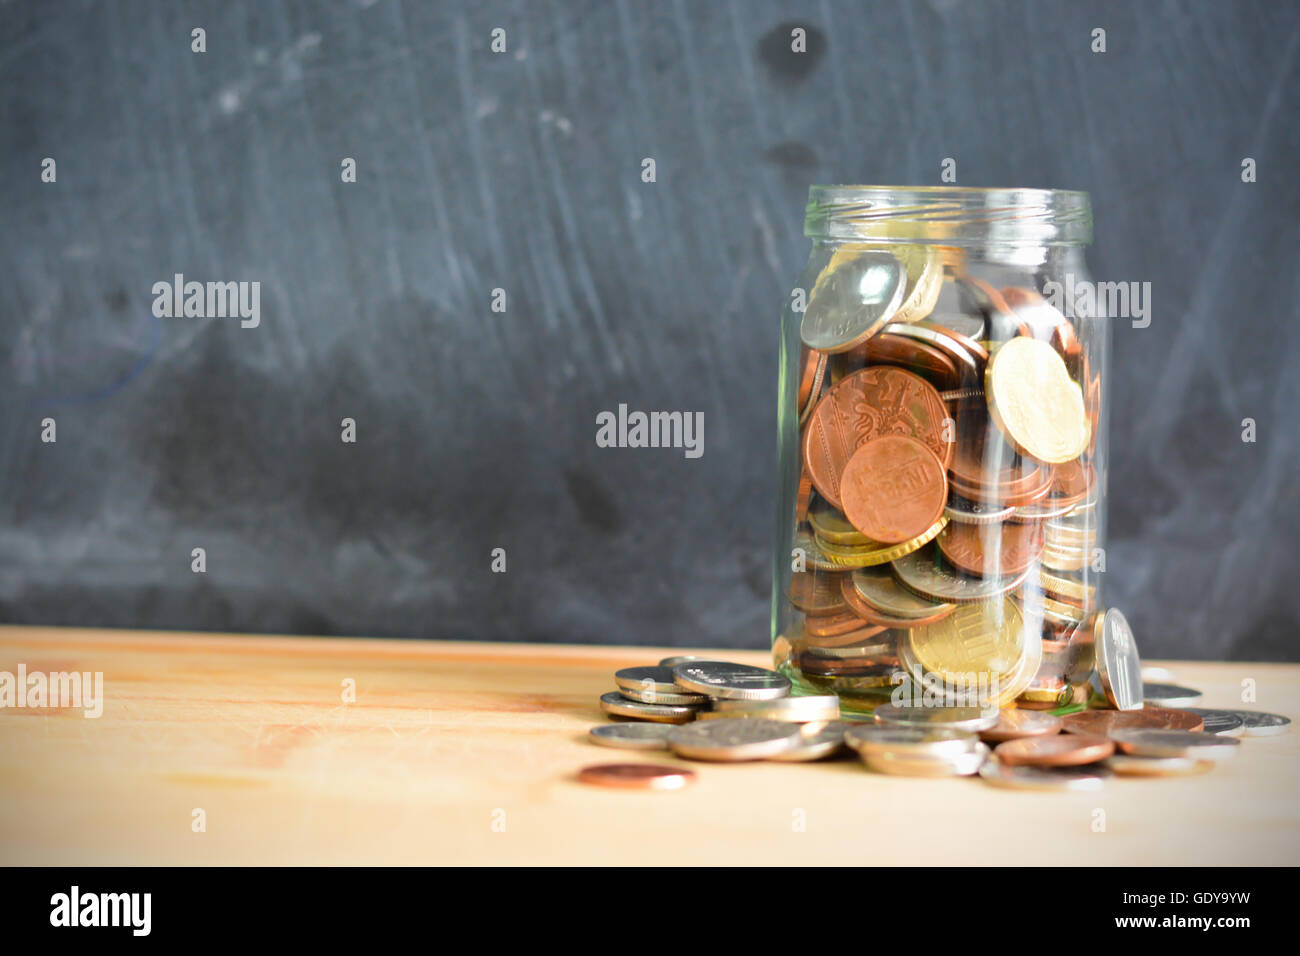 Personal savings concept illustrated with money in a jar Stock Photo